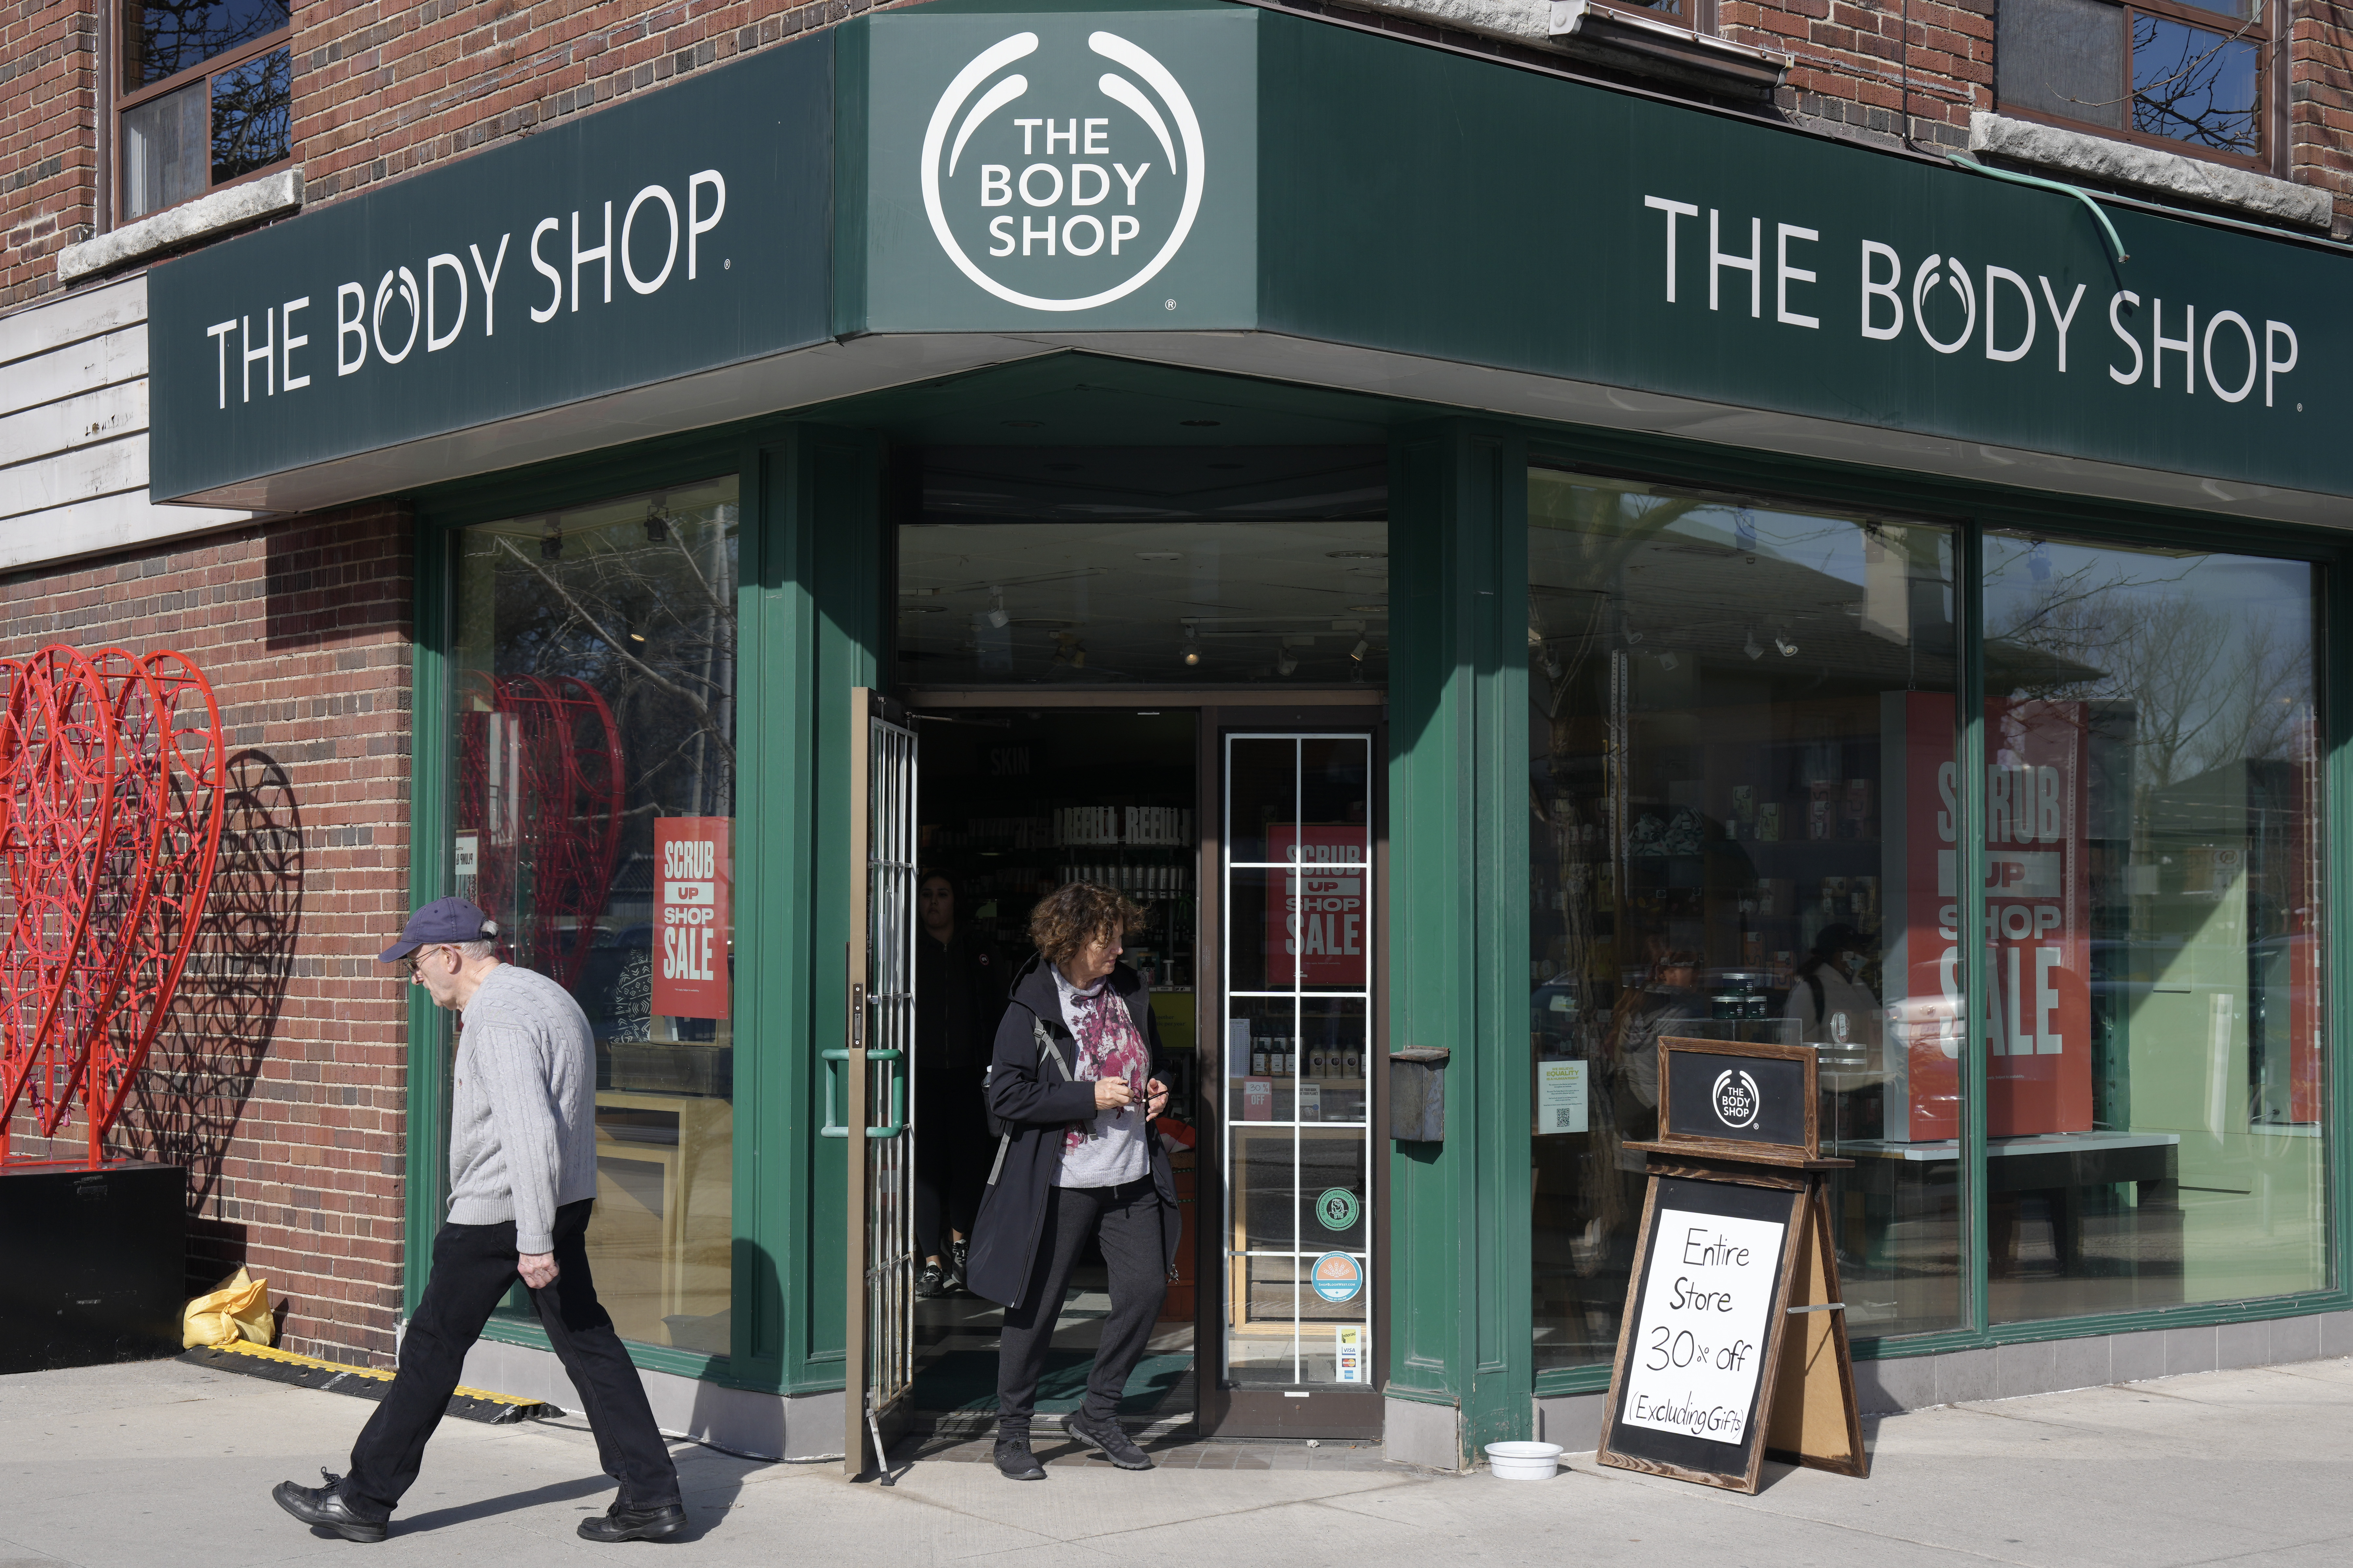 Body Shop Canada considers sale as demand outpaces inventory